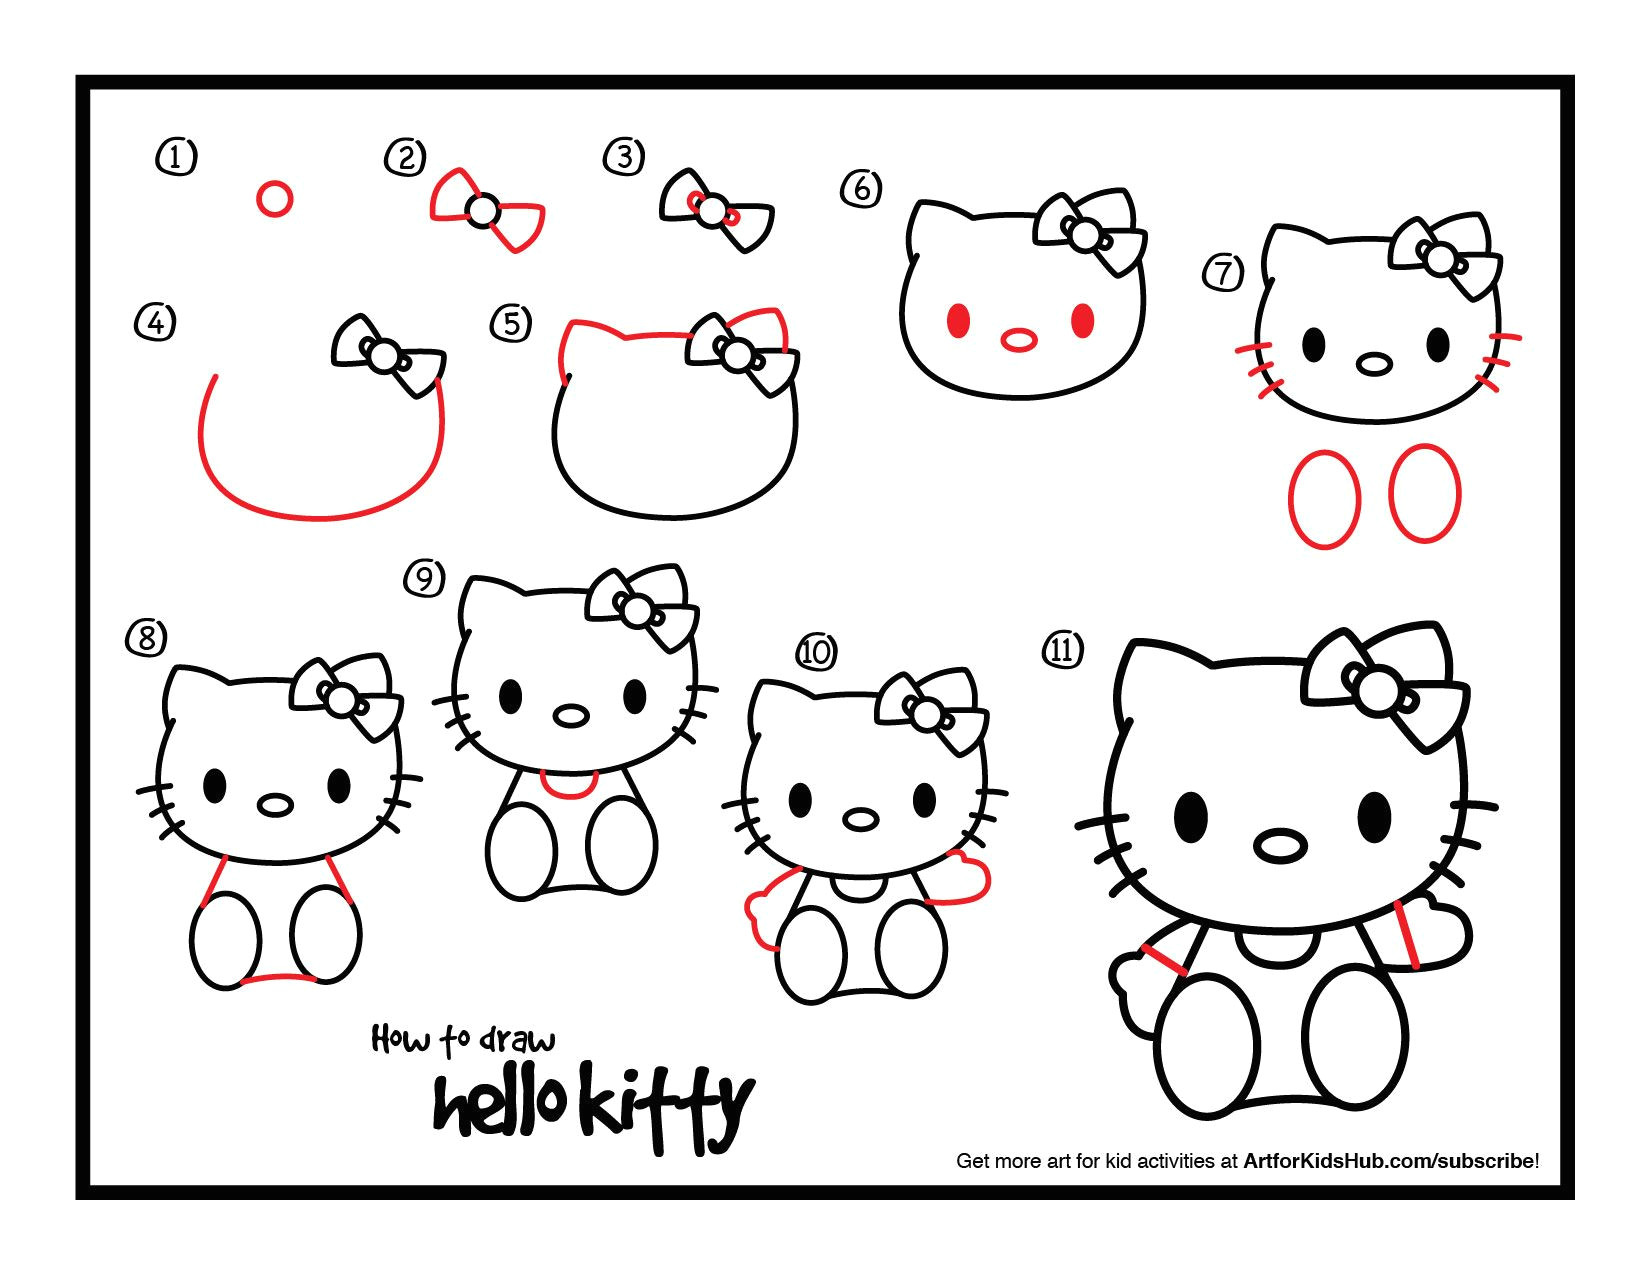 Kitty Drawing Easy How to Draw Hello Kitty How to Doodle Hello Kitty Art